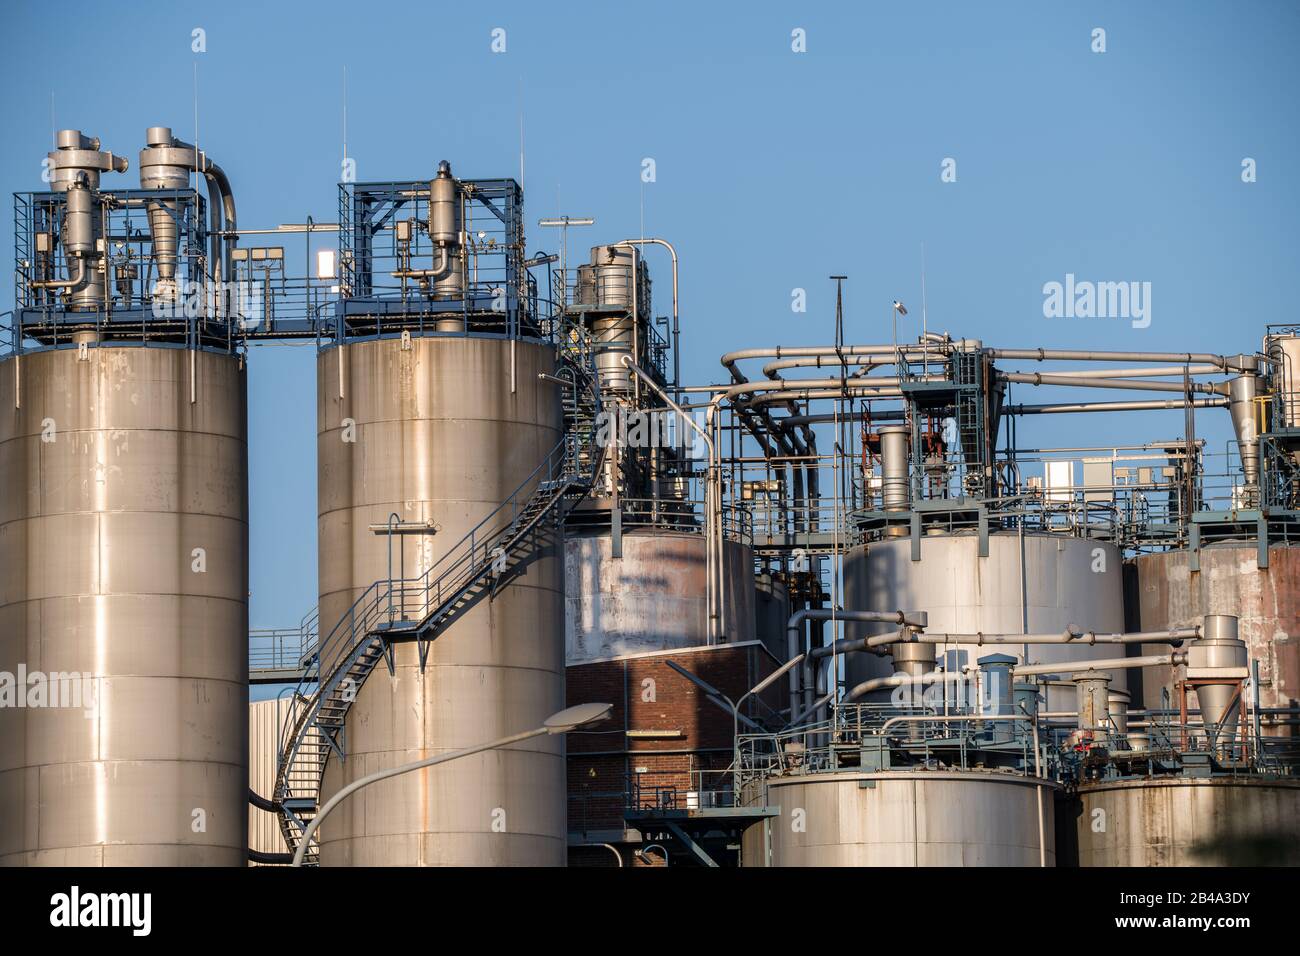 big tanks as part of a chemical plant Stock Photo